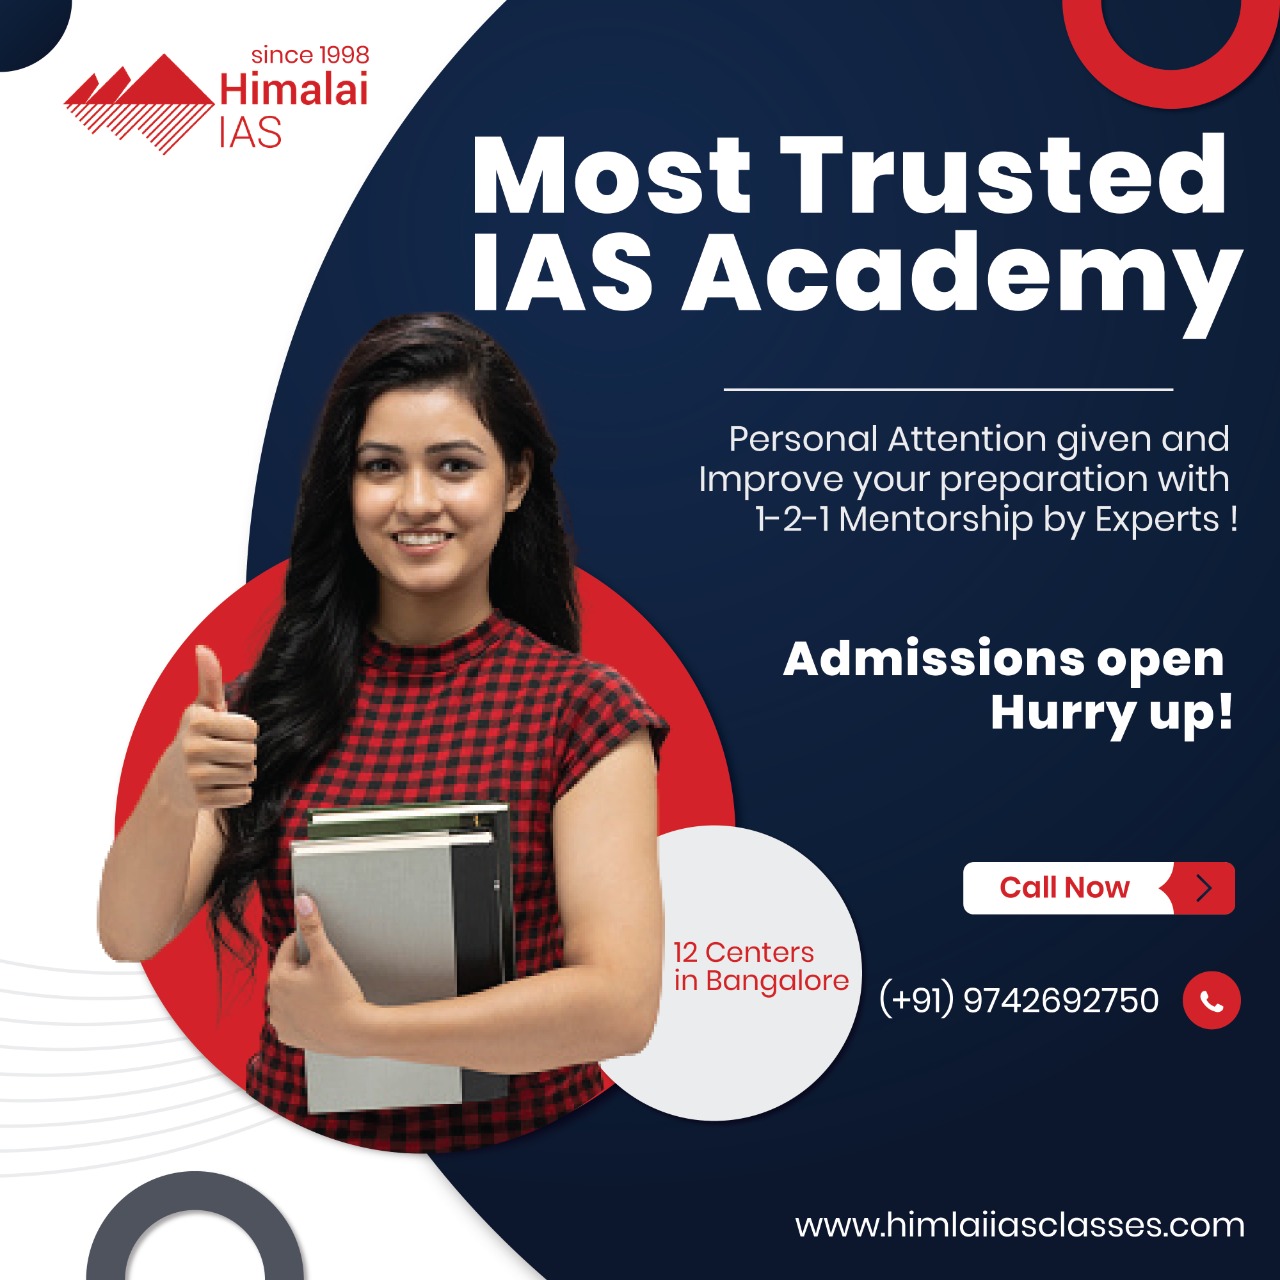 Get admissions for IAS classes with the Best IAS coaching in Bangalore.Education and LearningCoaching ClassesAll Indiaother